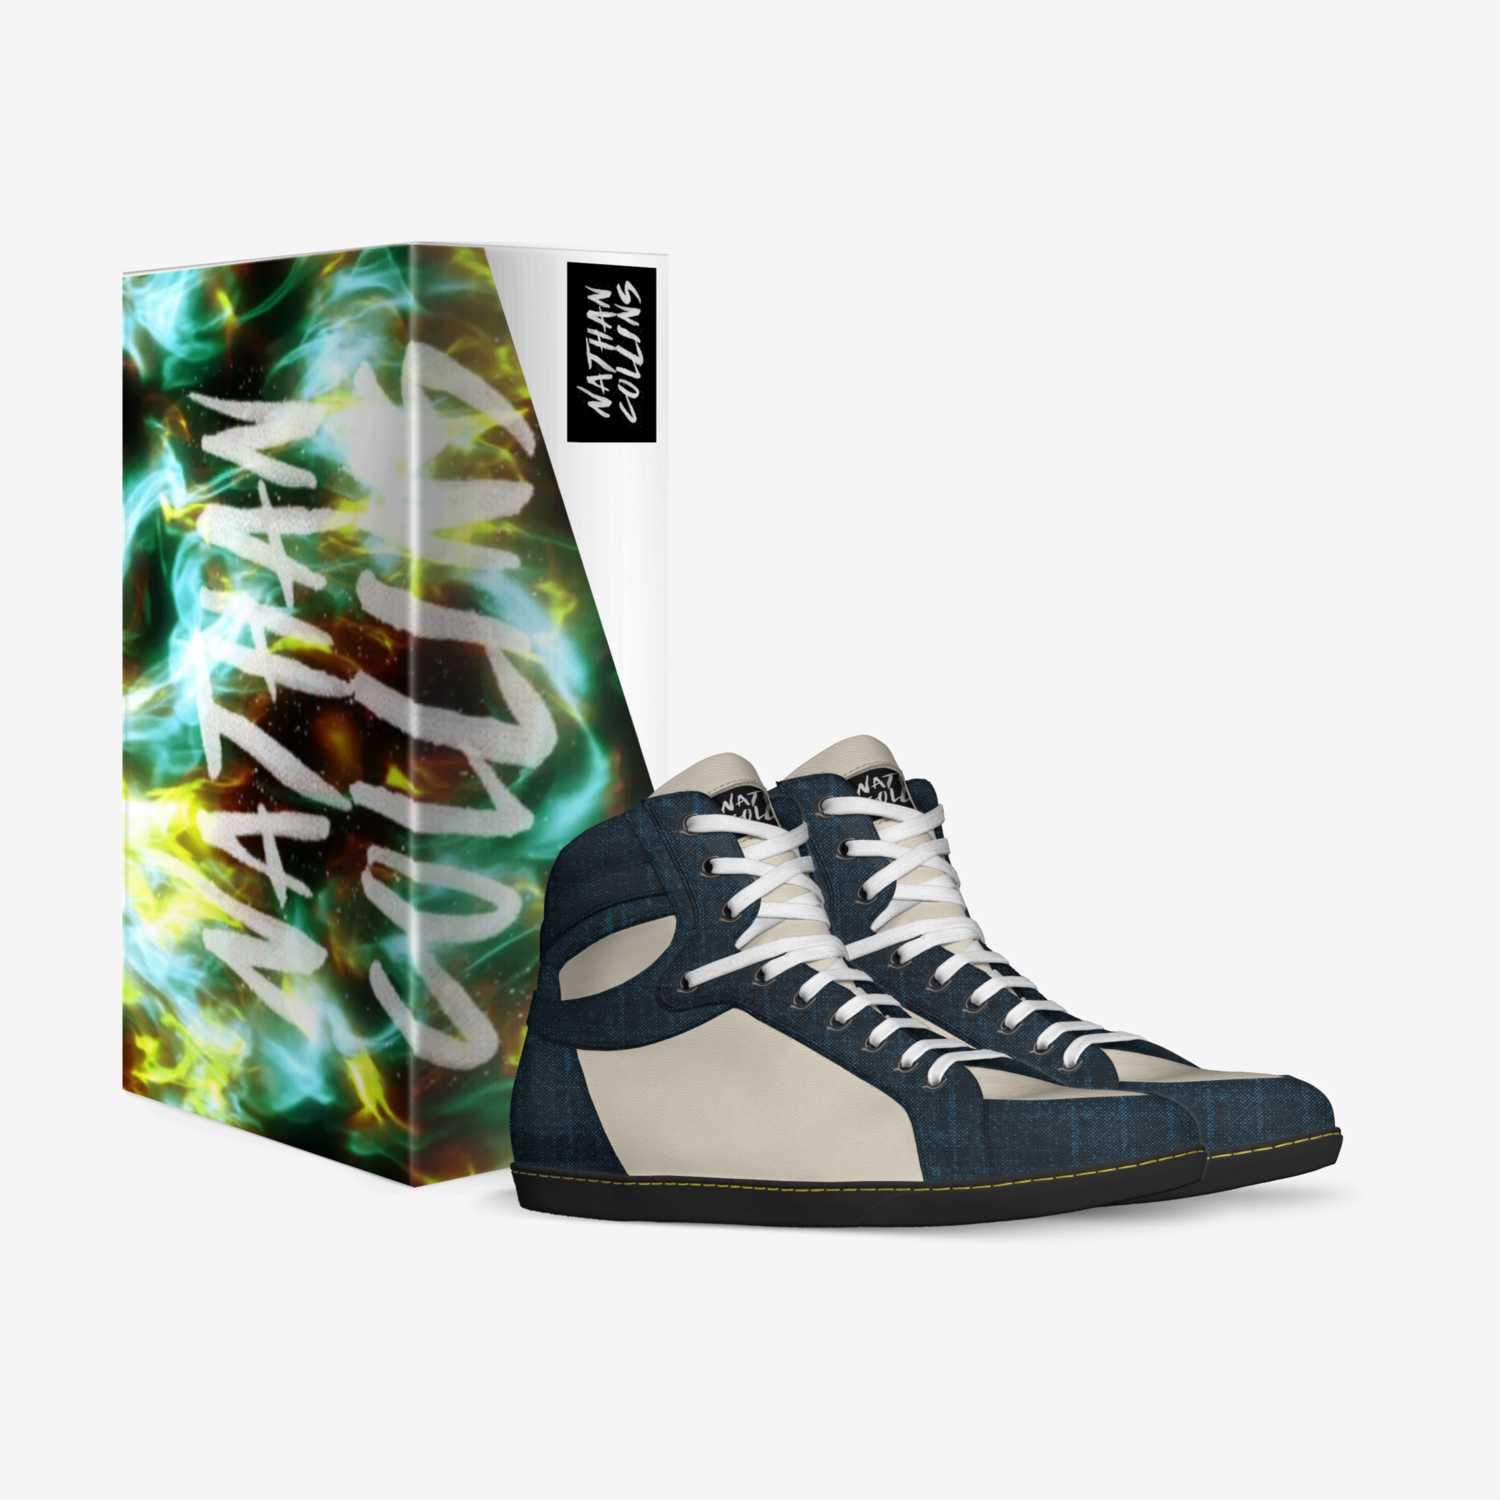 NTC FLAMES custom made in Italy shoes by Nathan Collins | Box view